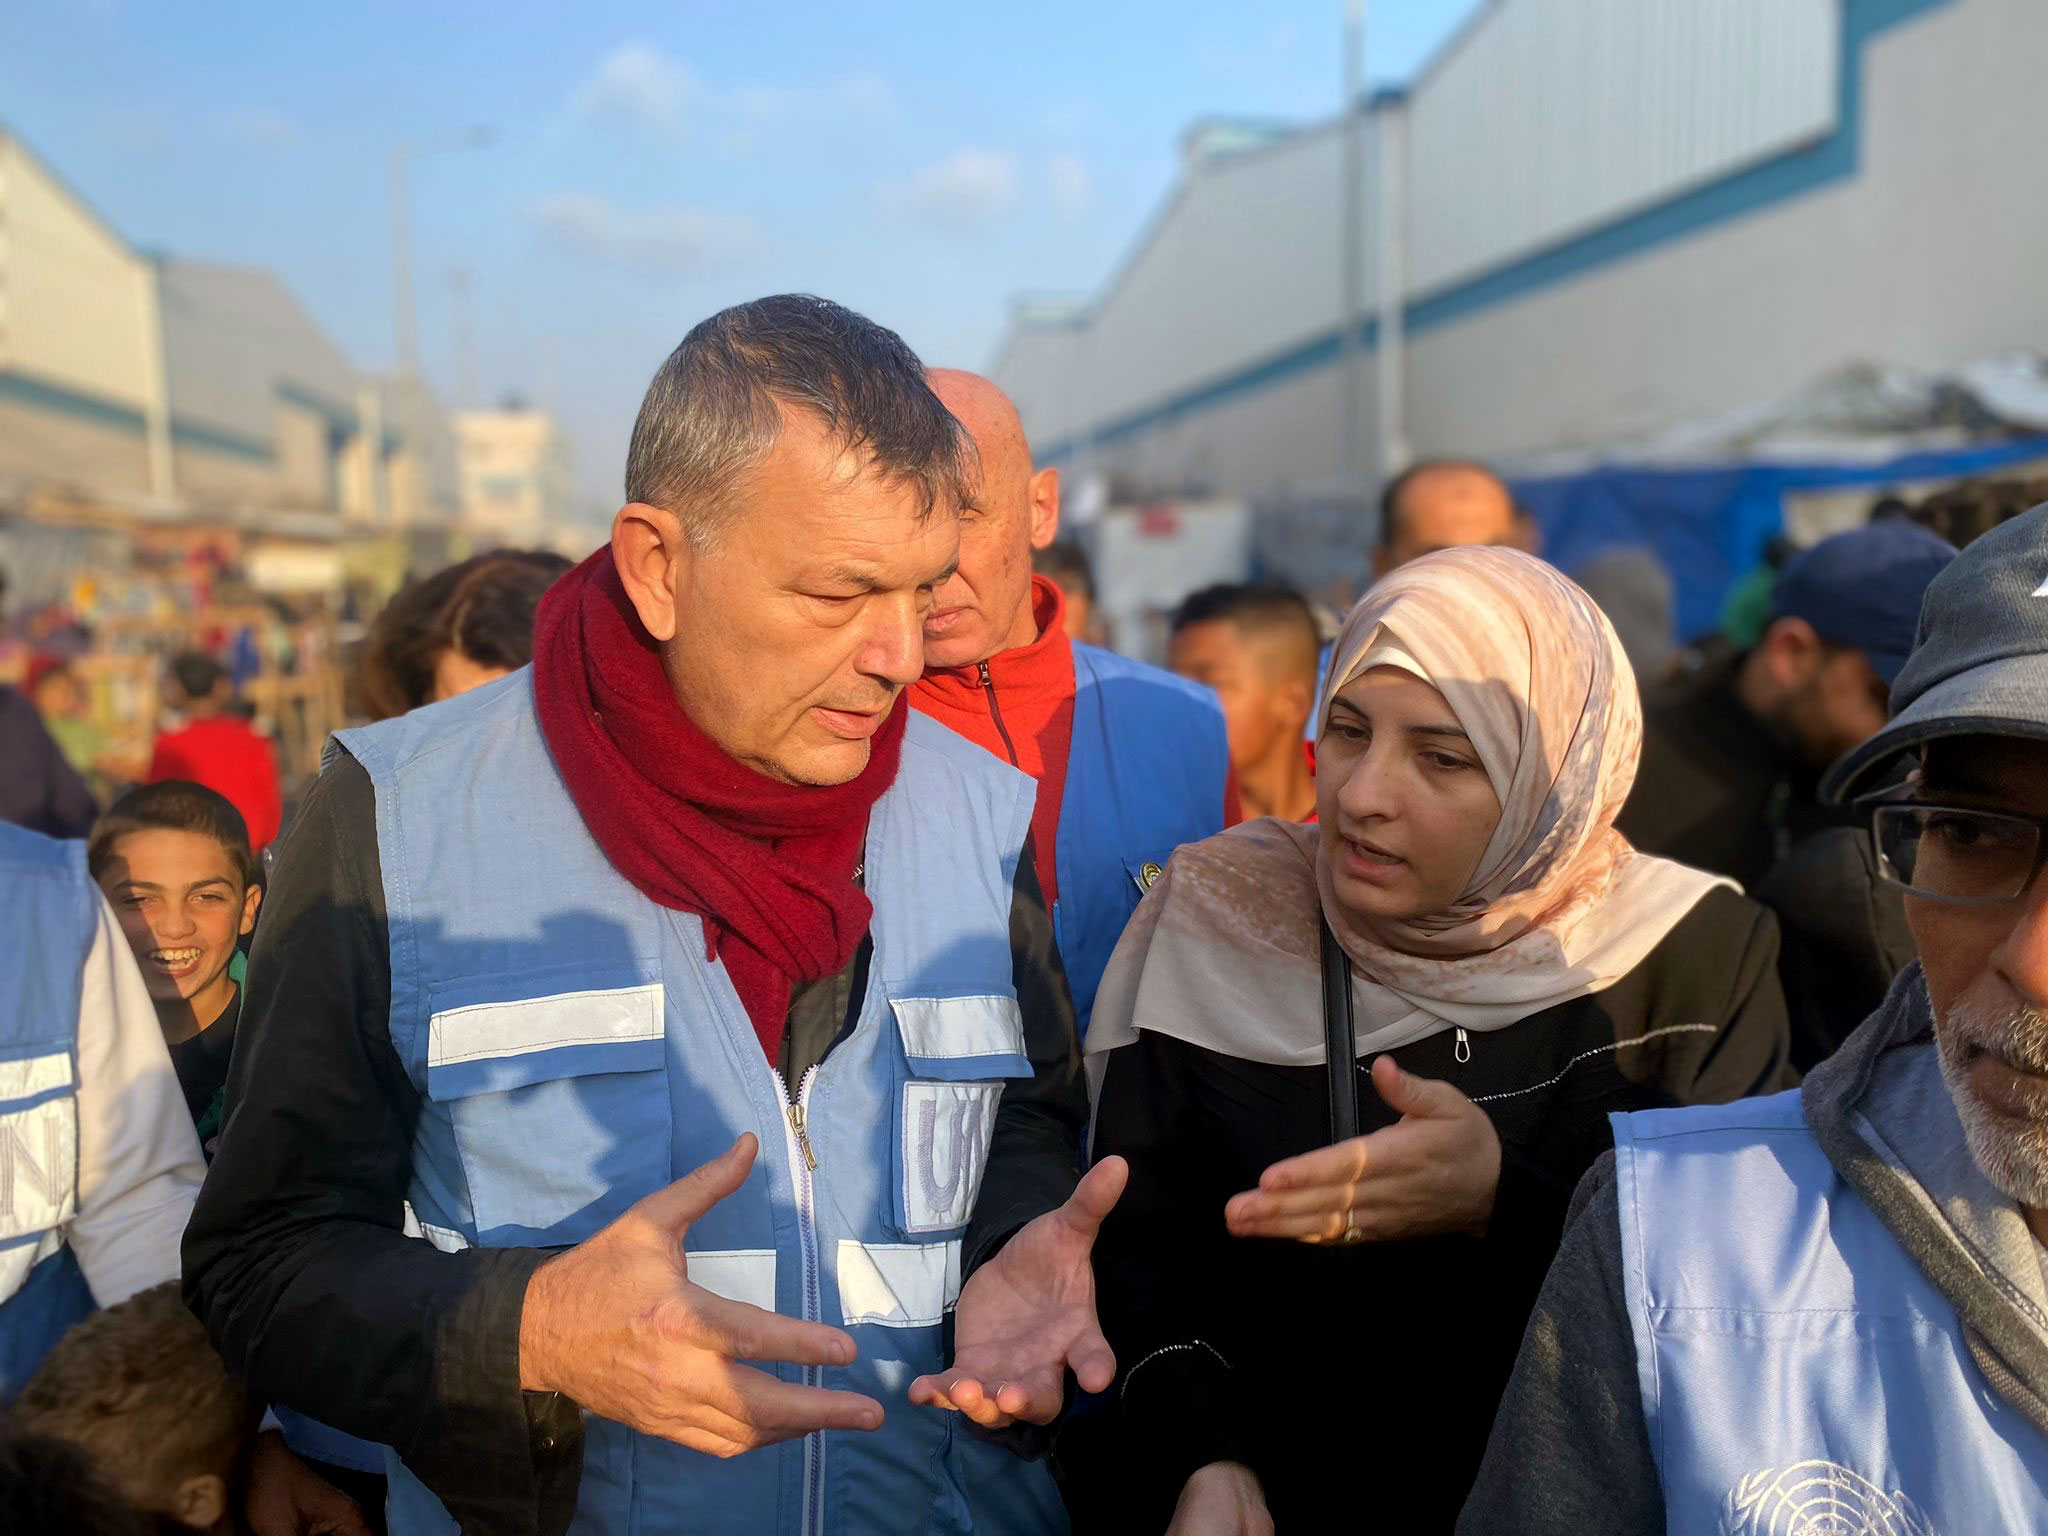 In a throng of people, Lazzarini - wearing an UNRWA blue vest - walks outdoors and chats with a woman - herself wearing a veil.